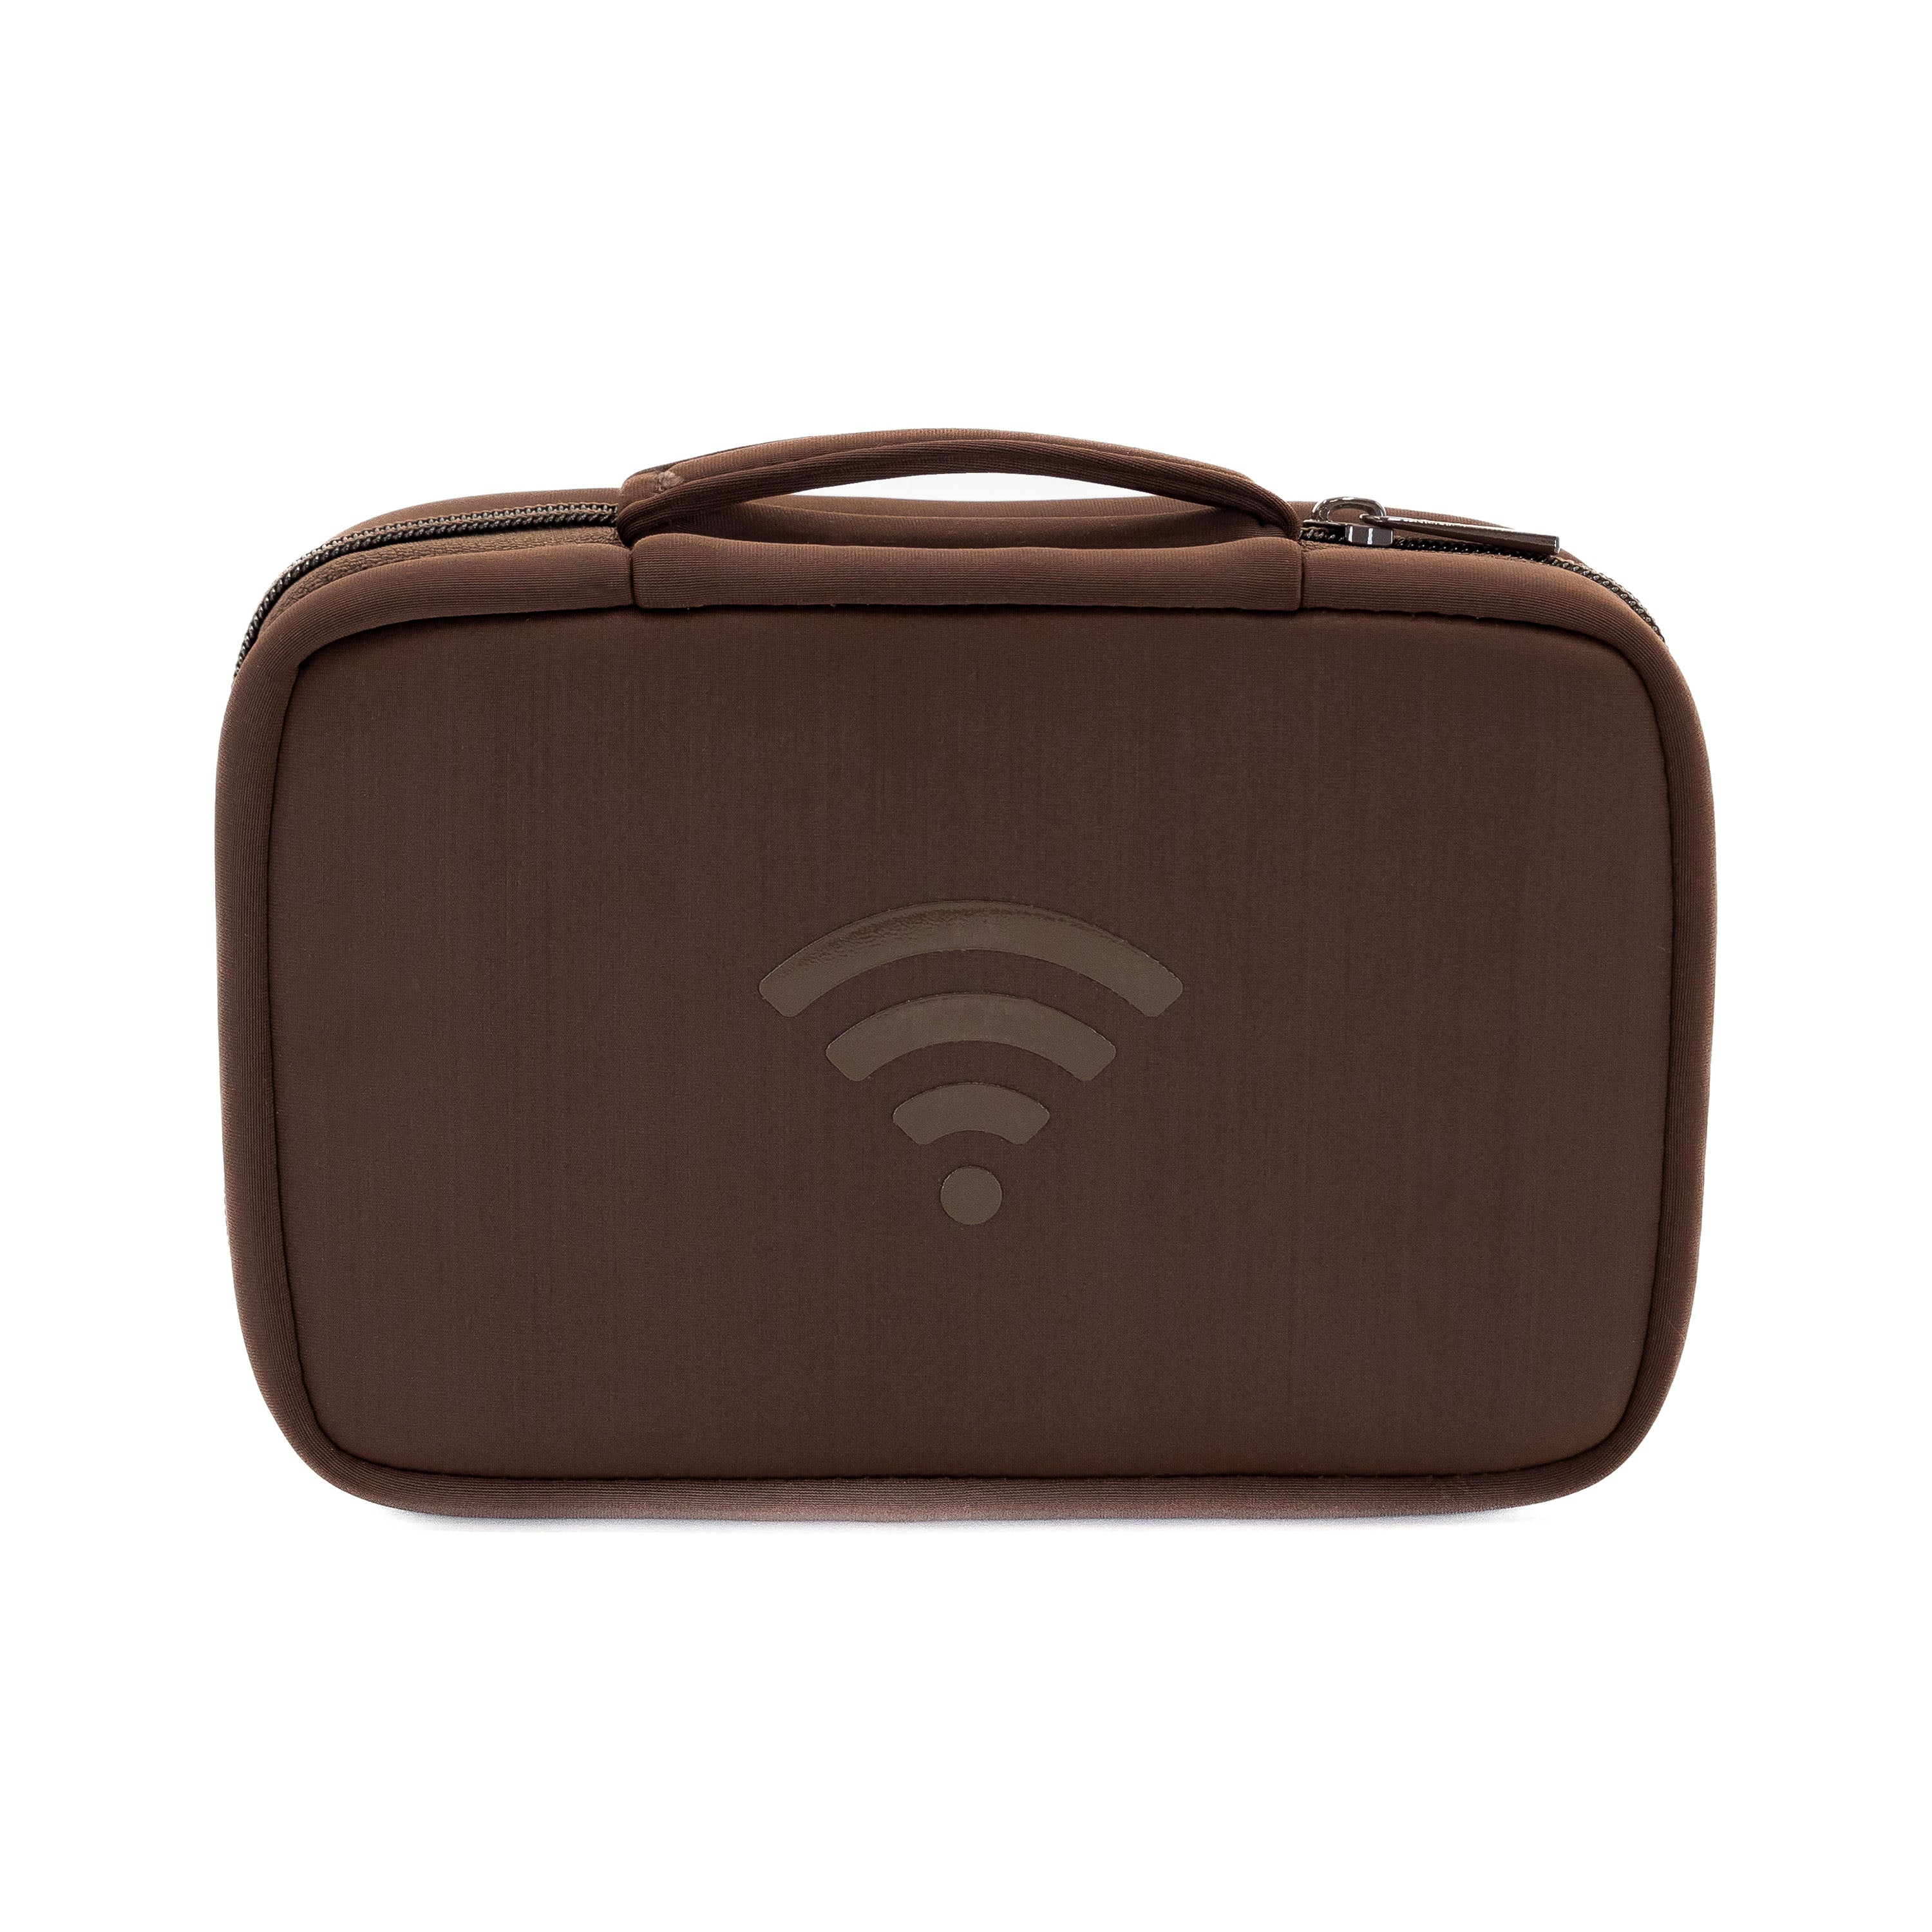 Brown Cord case and charger case made of Neoprene